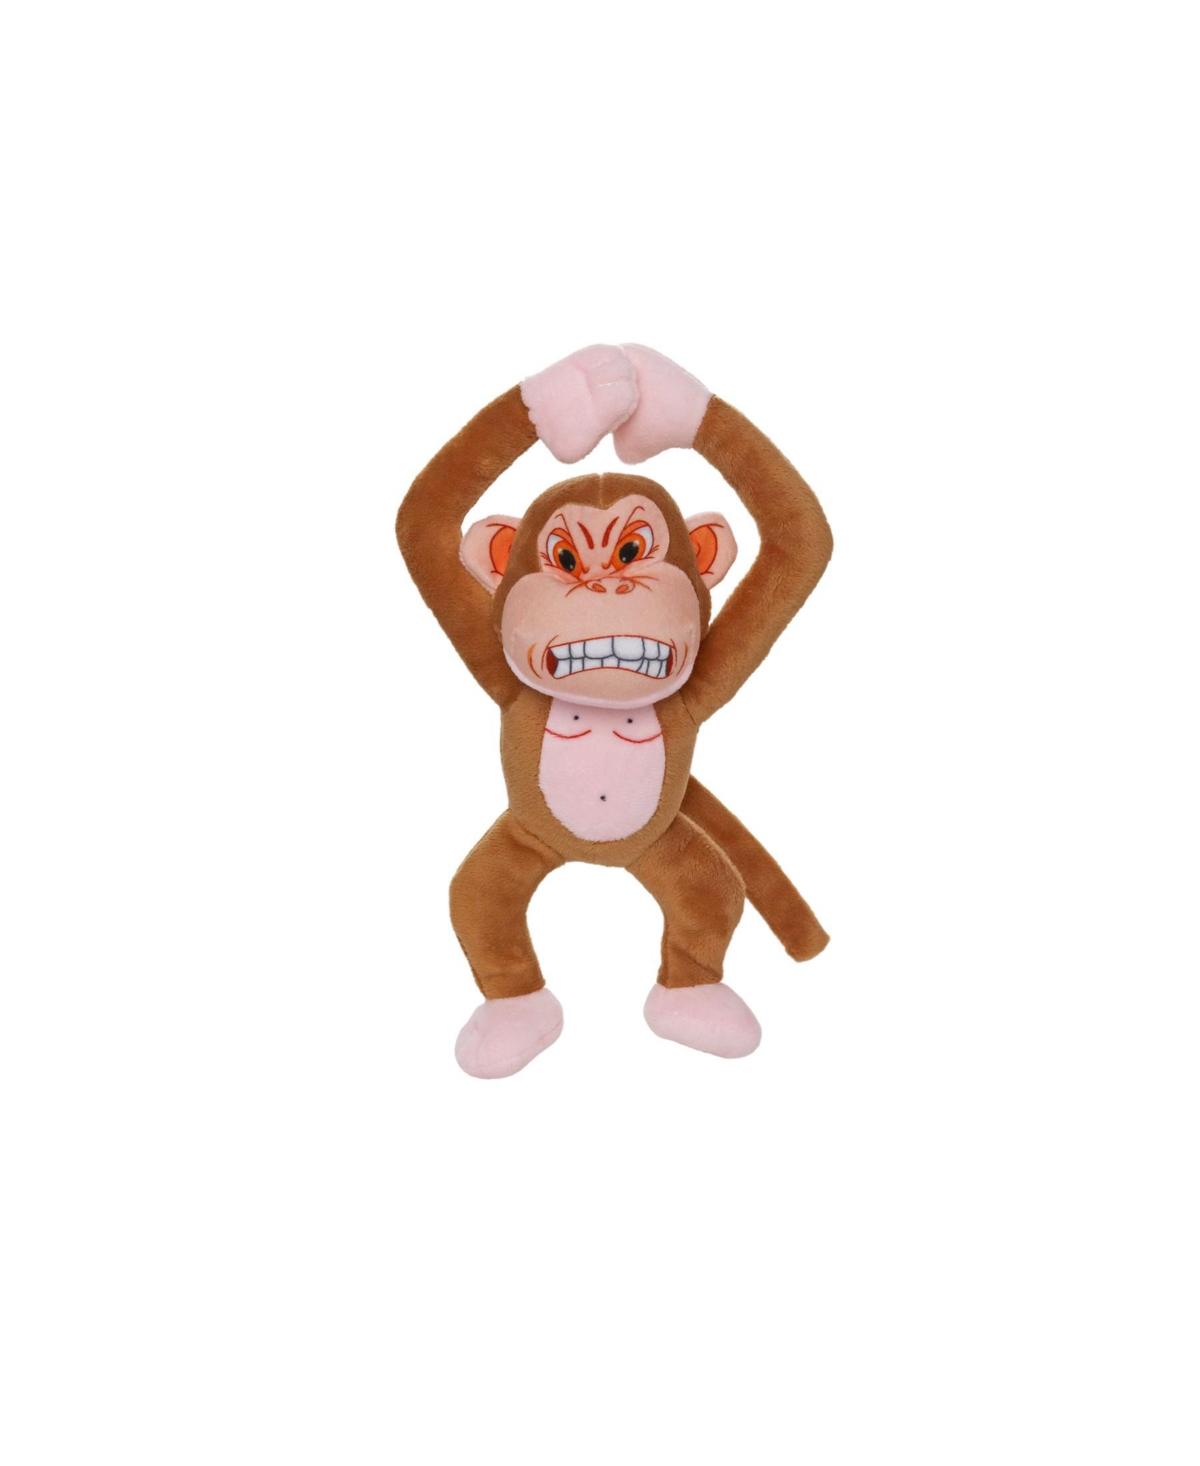 Jr Angry Animals Monkey, Dog Toy - Brown